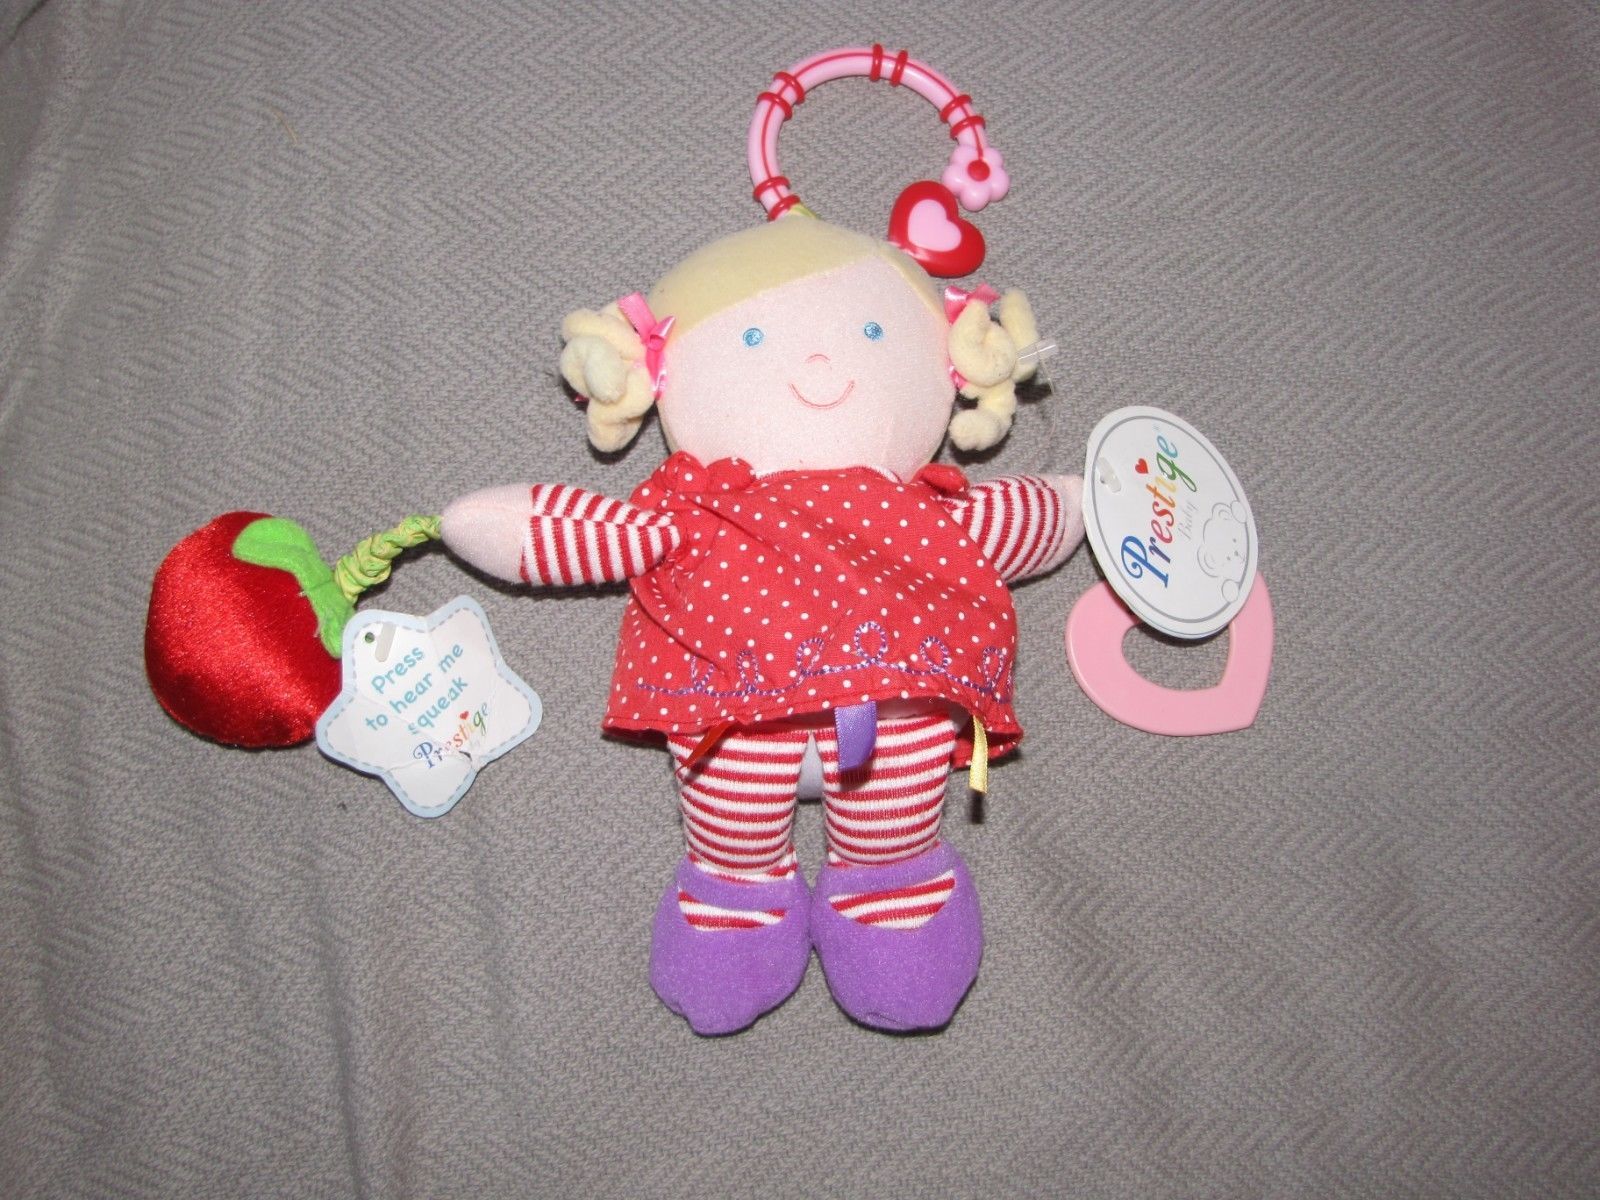 Primary image for 8.5" PRESTIGE STUFFED PLUSH BABY GIRL RATTLE DOLL TOY TEETHER SQUEAK APPLE LINK